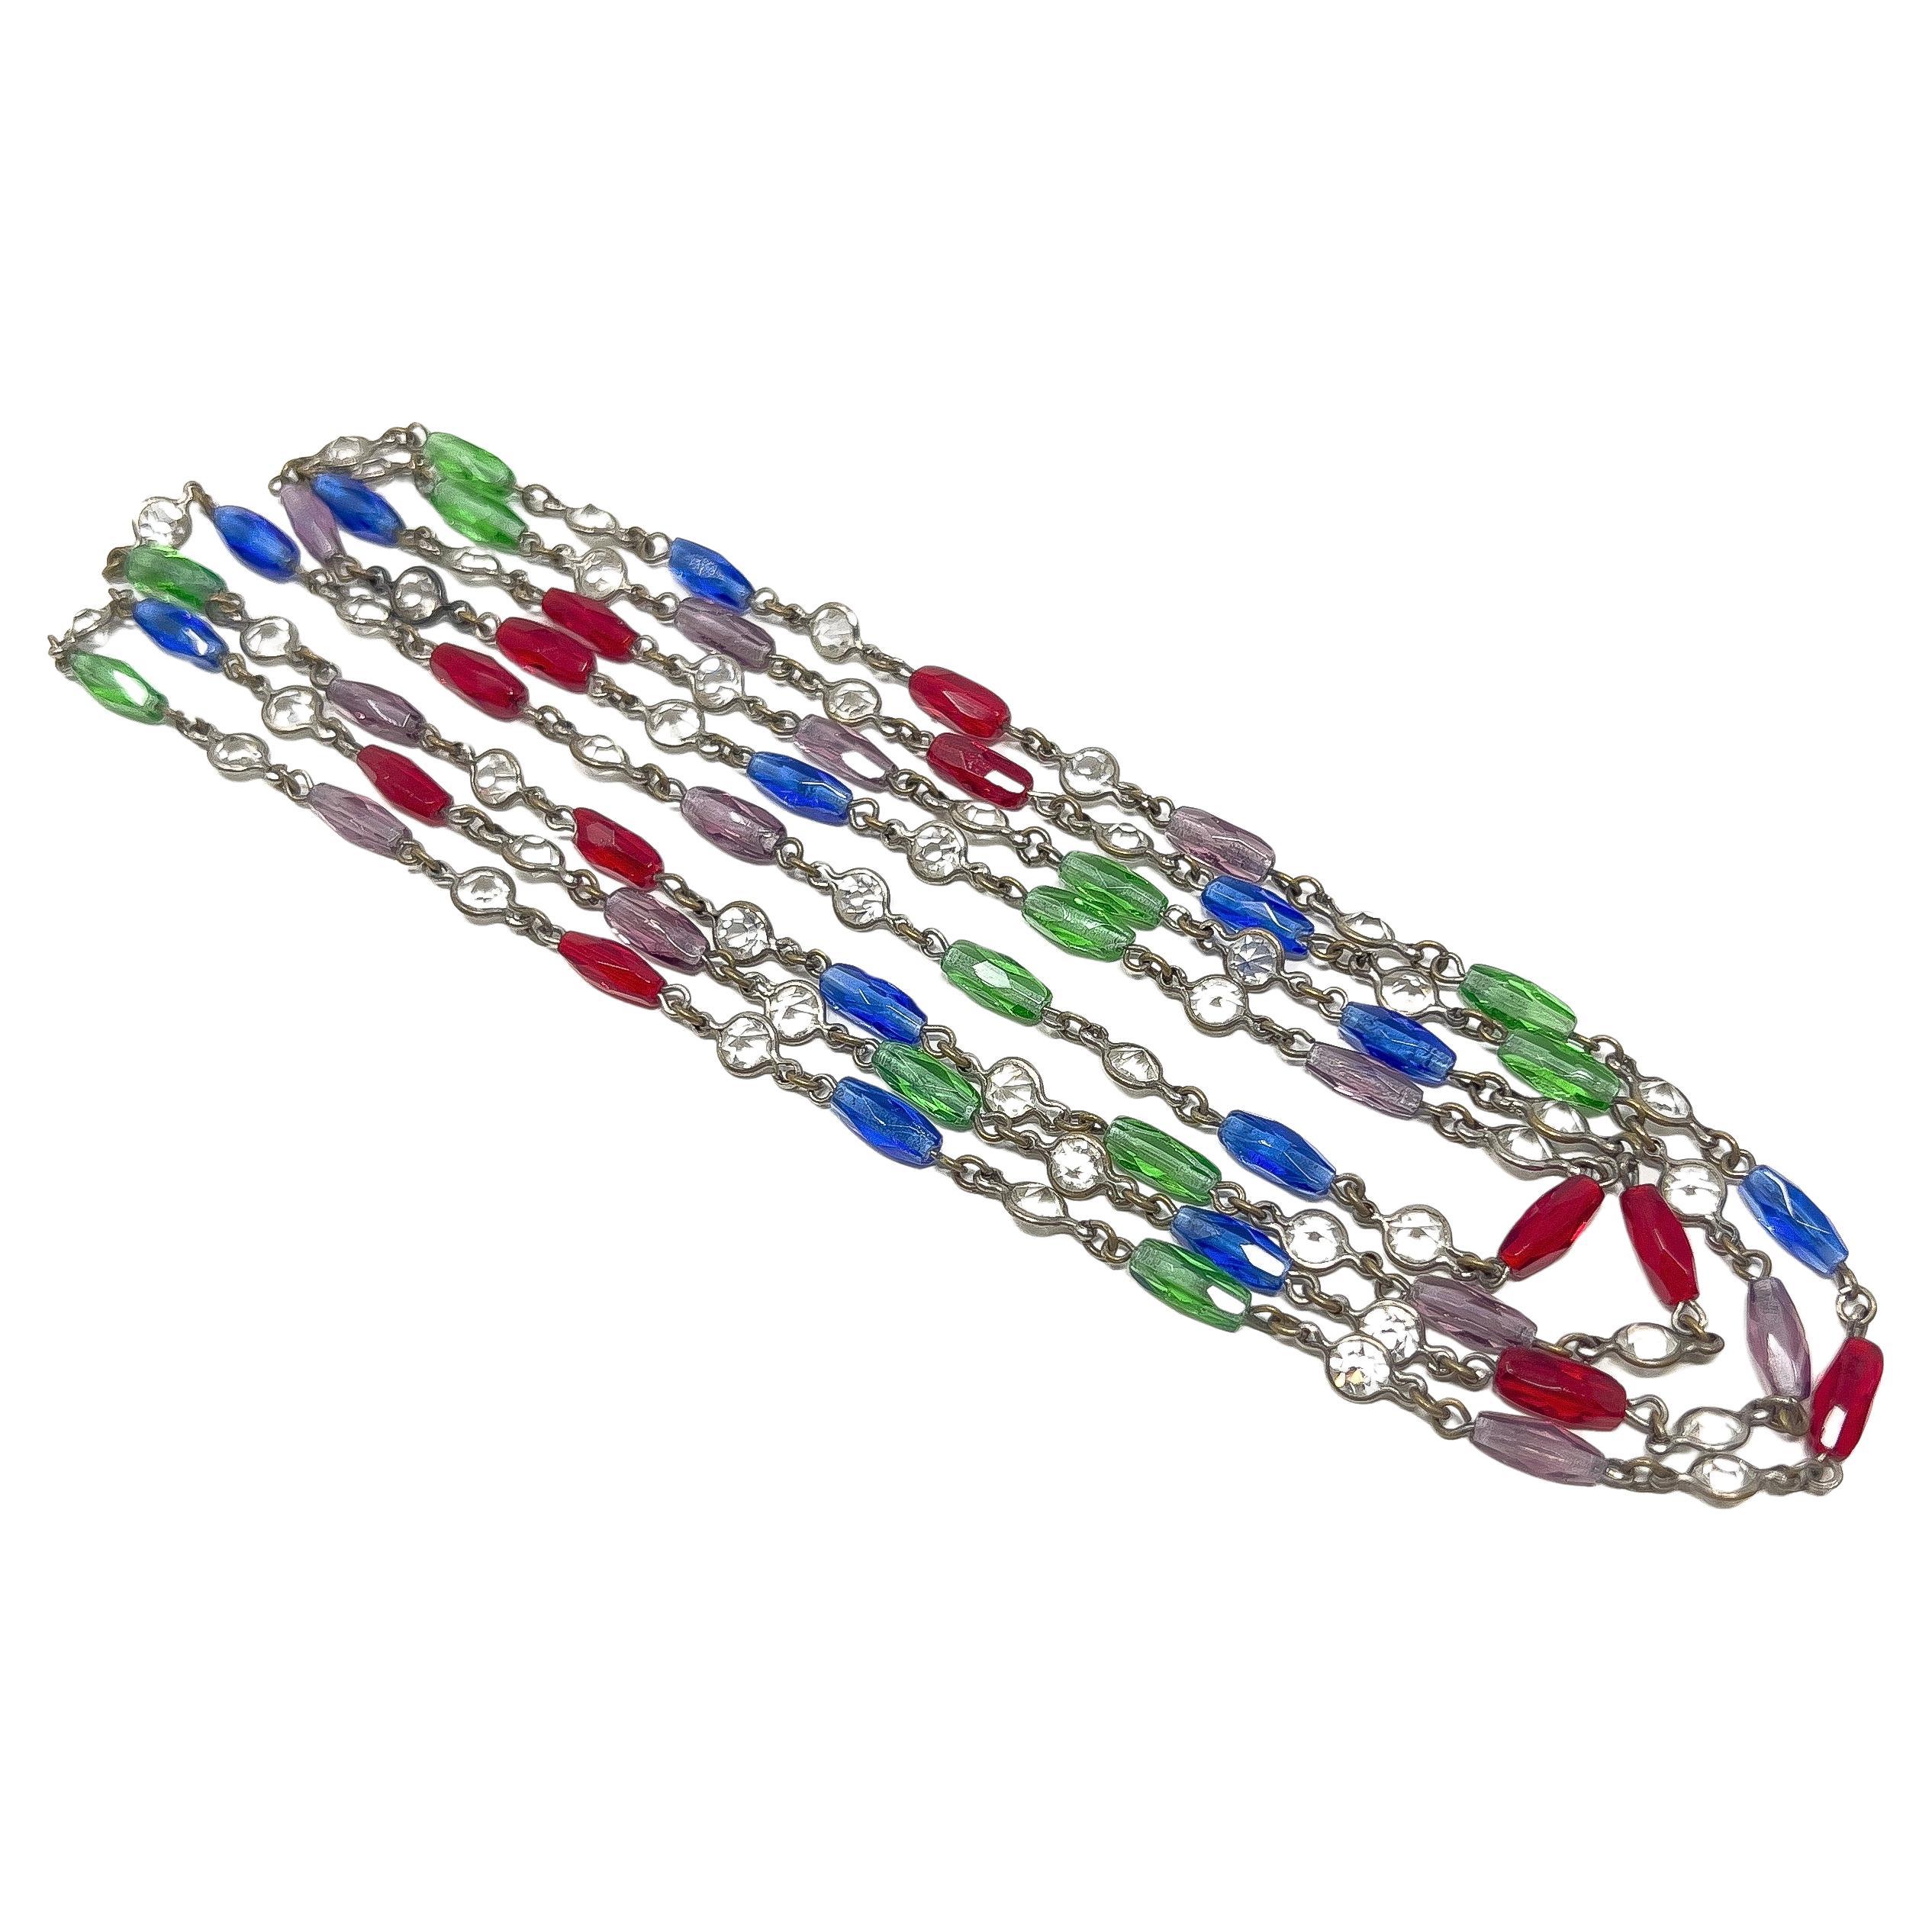 Edwardian c.1900 Crystal and Multi-Coloured Glass Antique Long Guard Chain For Sale